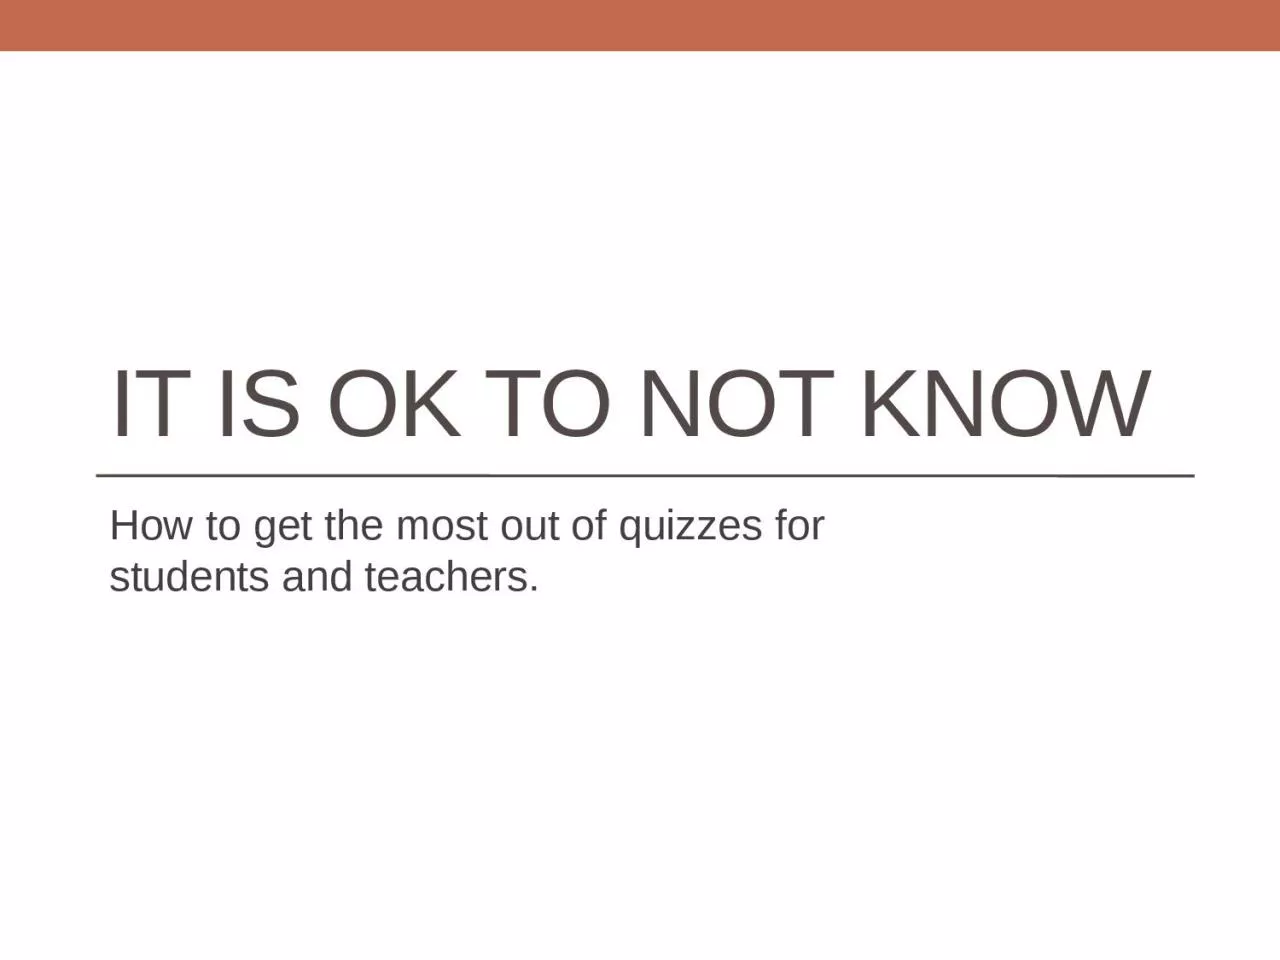 It is OK to not know How to get the most out of quizzes for students and teachers.